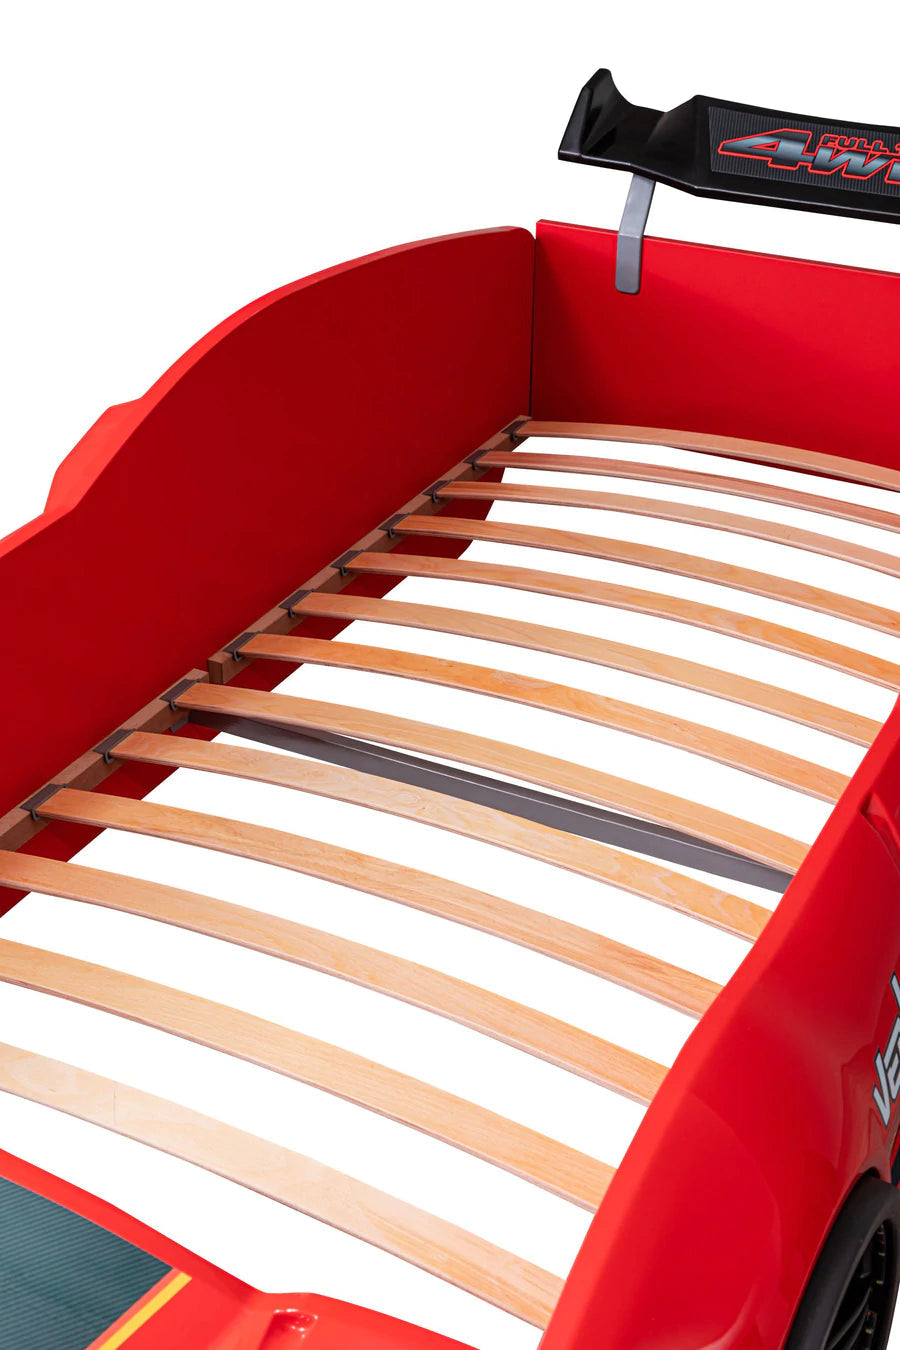 Thomas Red Racer Car bed